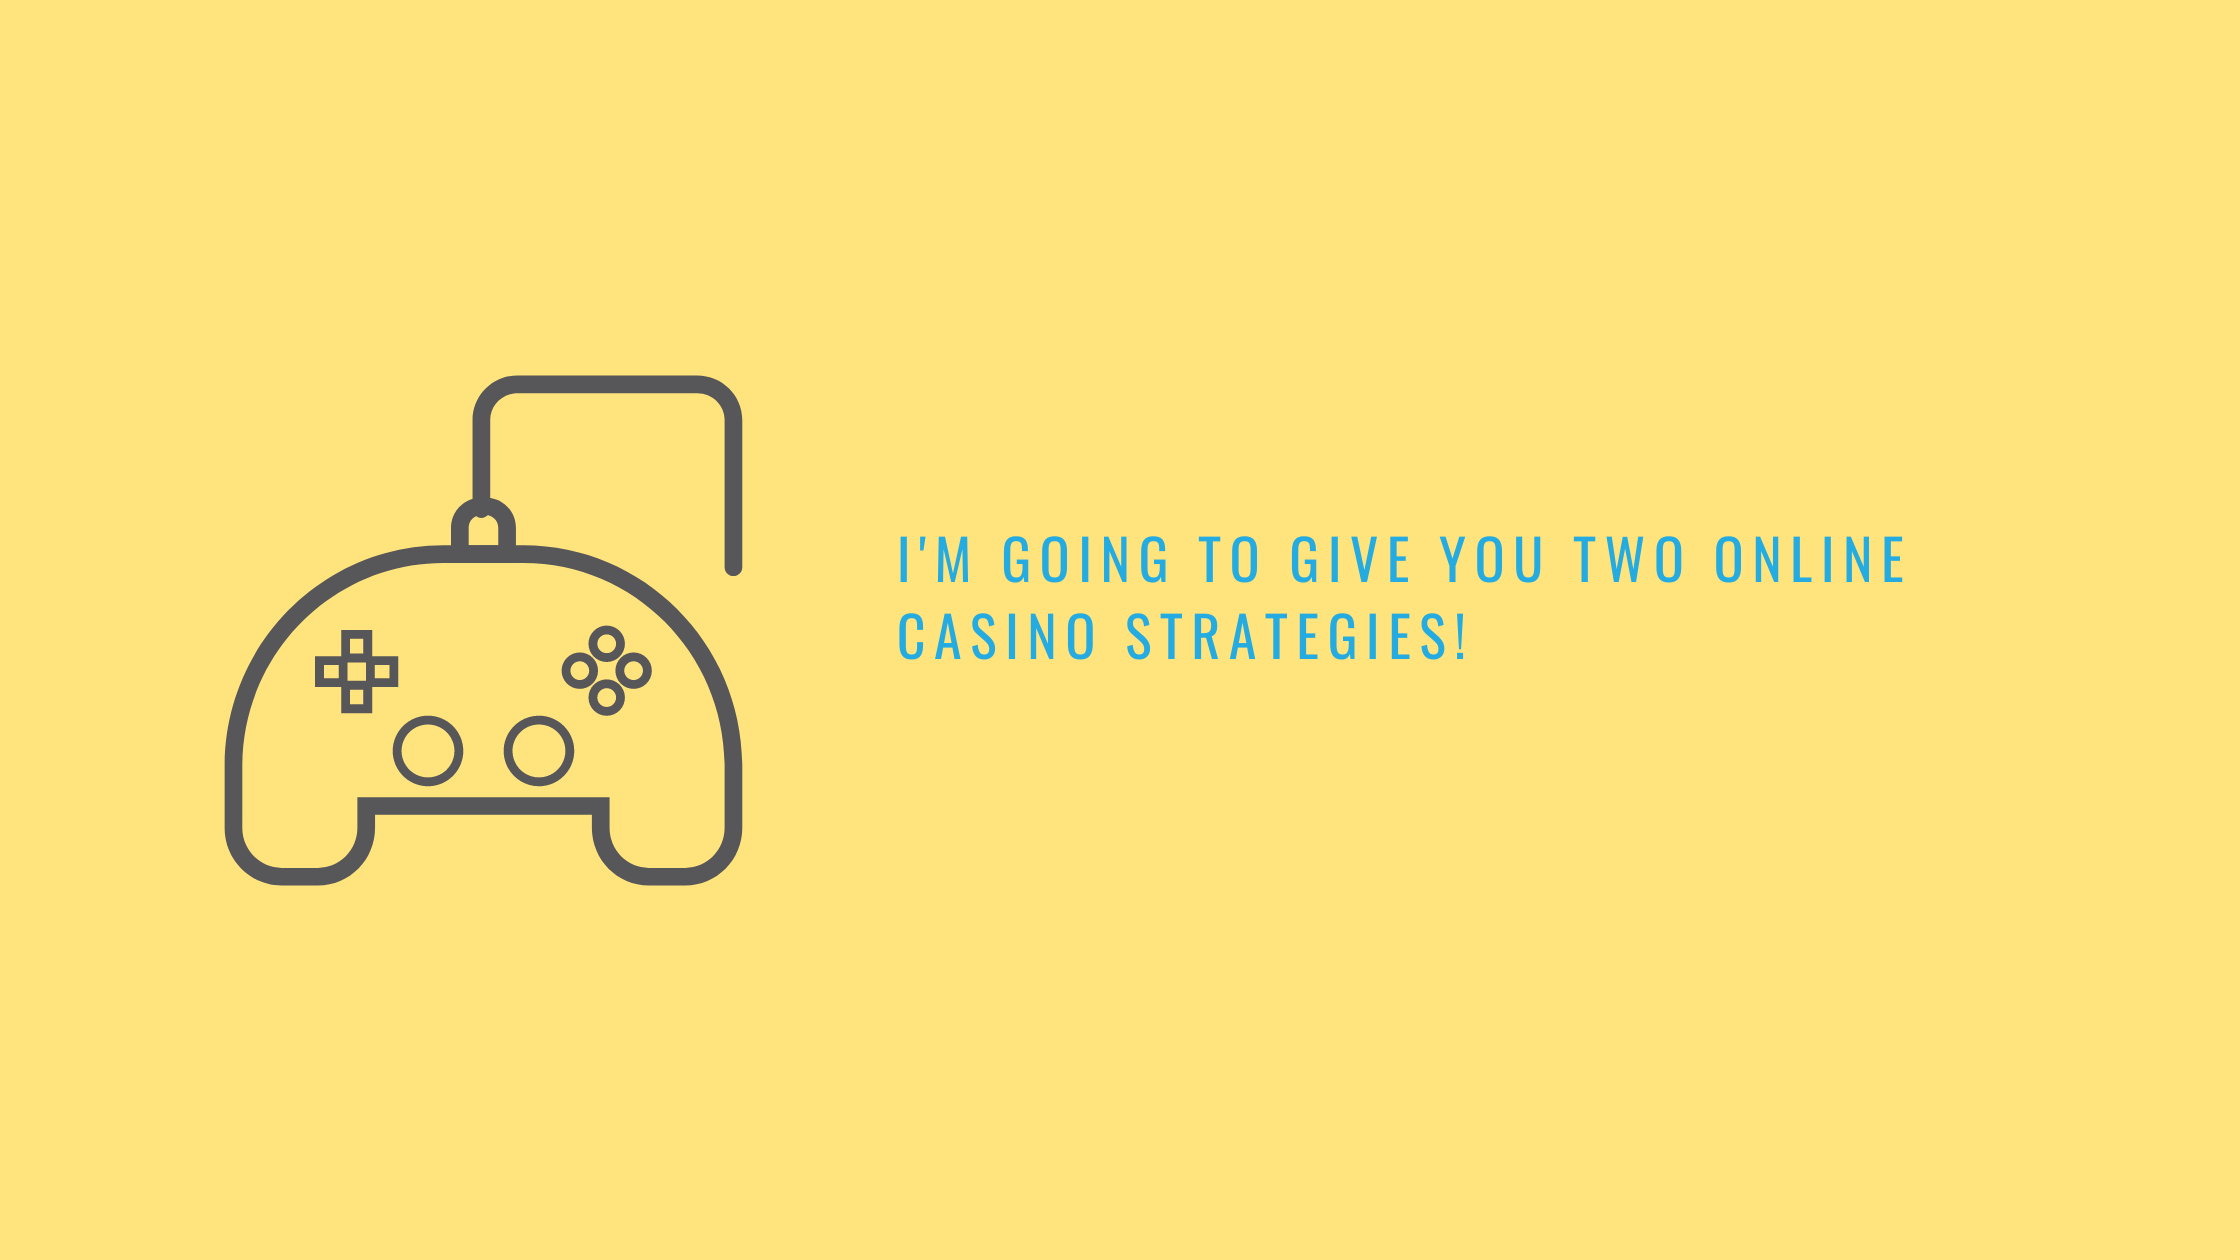 I'm going to give you two online casino strategies!